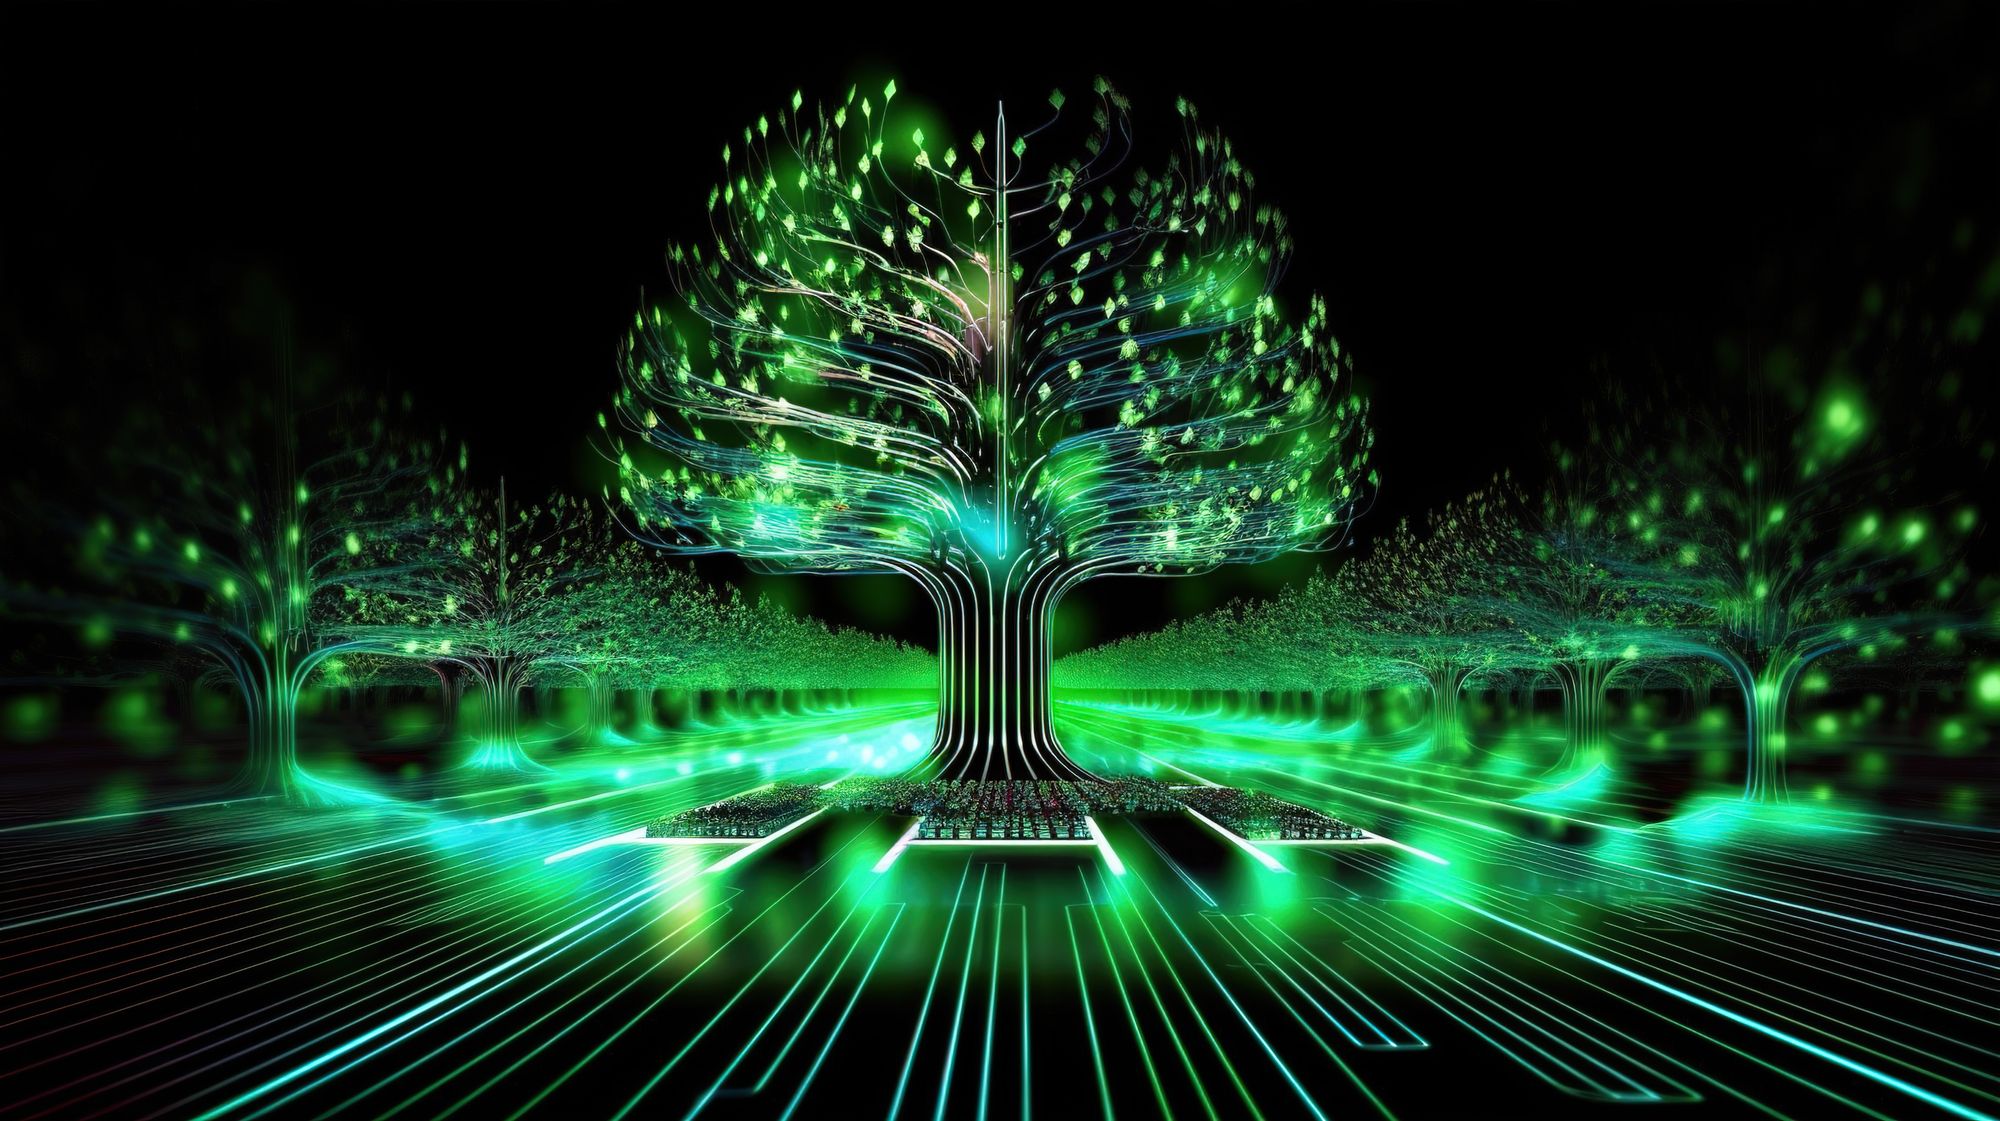 A picture of a green tree consisting of digital (electrical) conductors